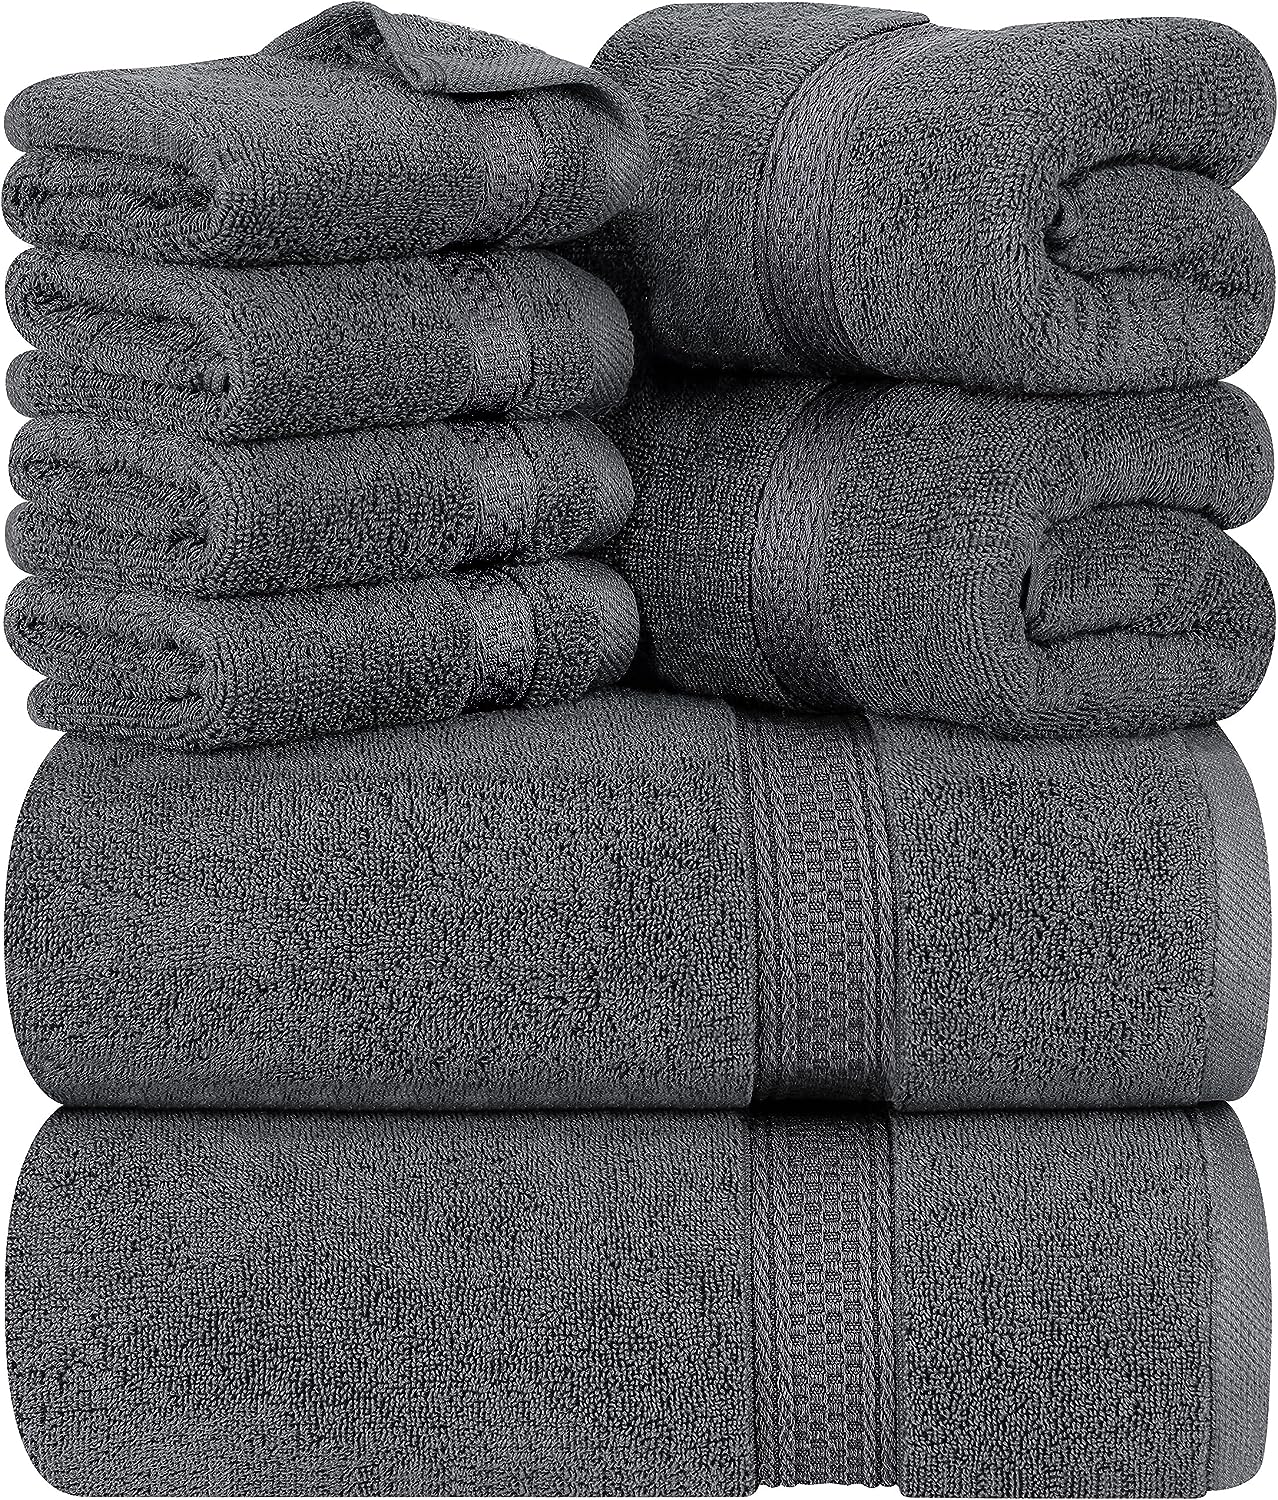 The Clean Store 10 Piece Pink Cotton Bath Towel Set (2 Bath Towels, 2 Hand Towels and 6 Washcloths)